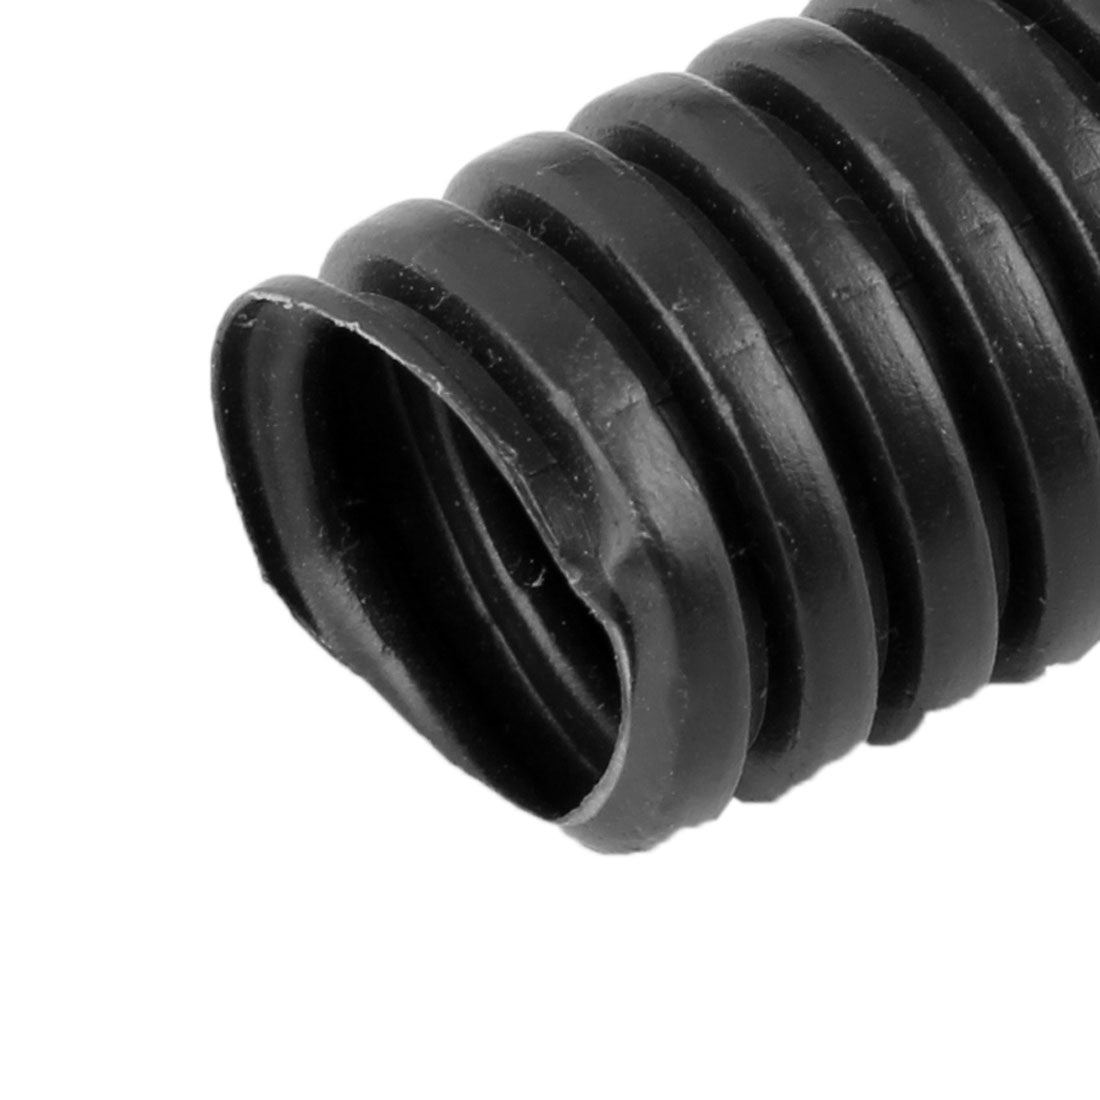 uxcell Uxcell 5 M 13 x 15.8 mm PVC Flexible Corrugated Conduit Tube for Garden,Office Black